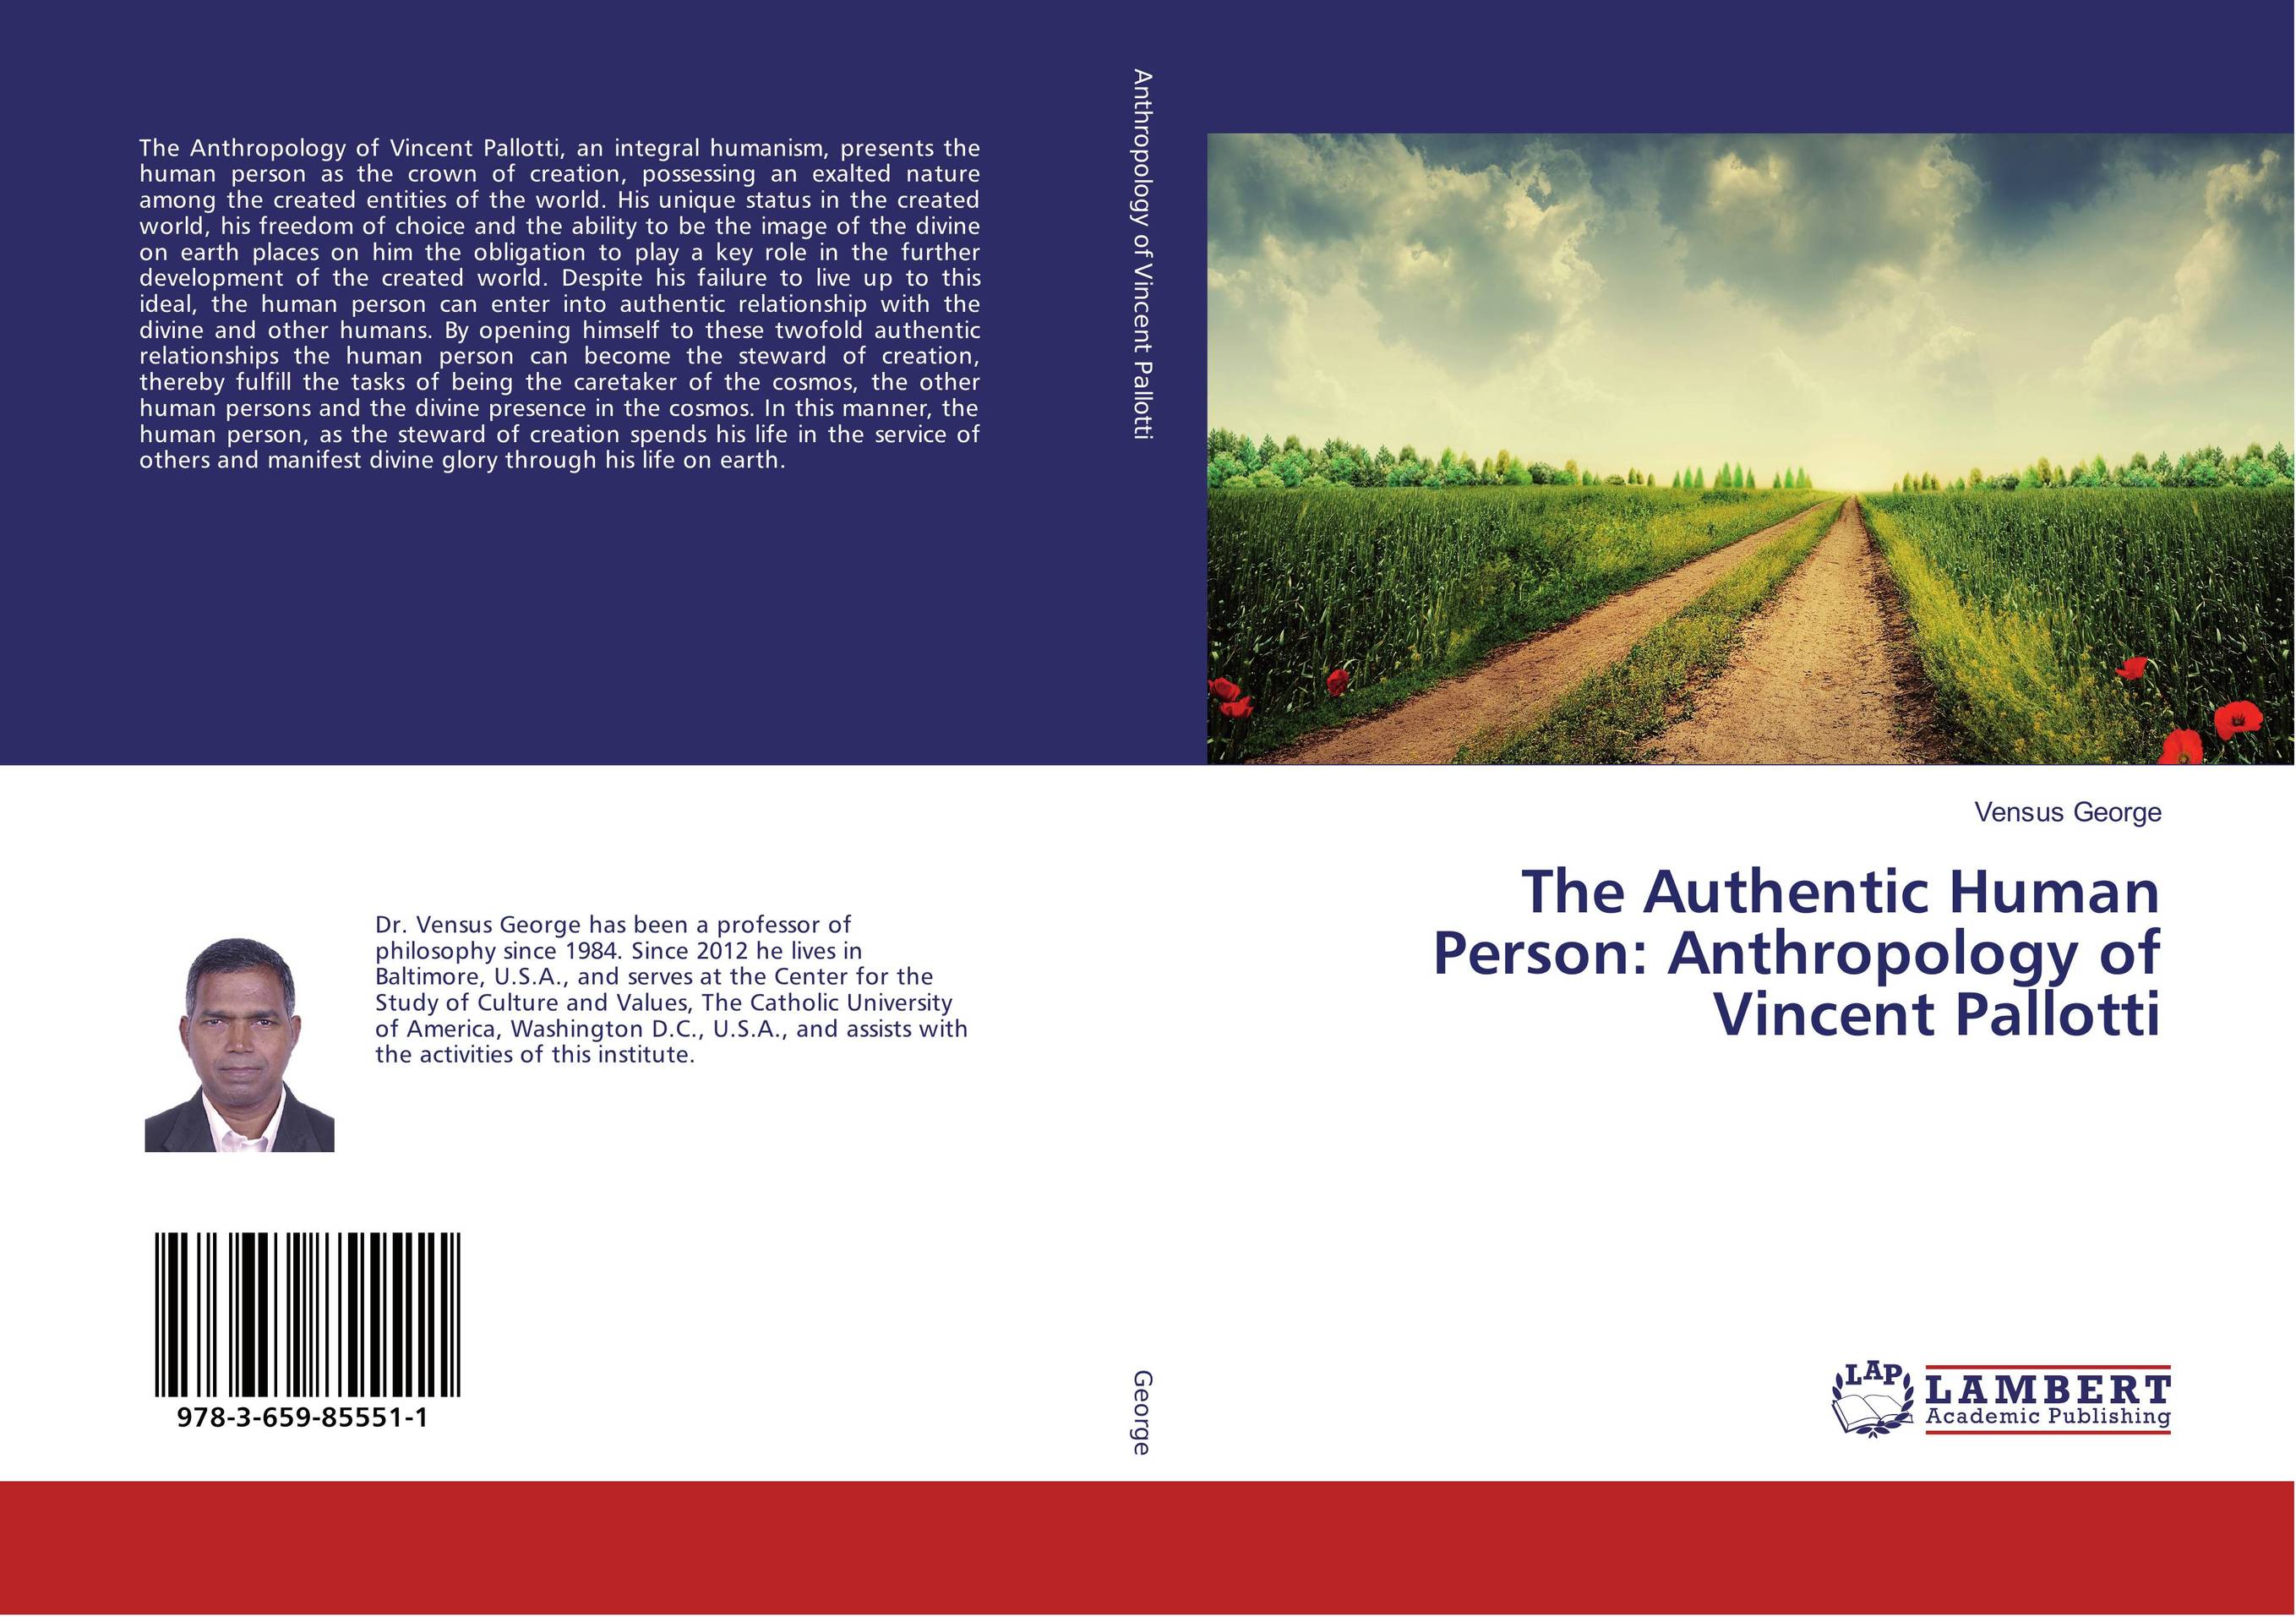 The Authentic Human Person: Anthropology of Vincent Pallotti